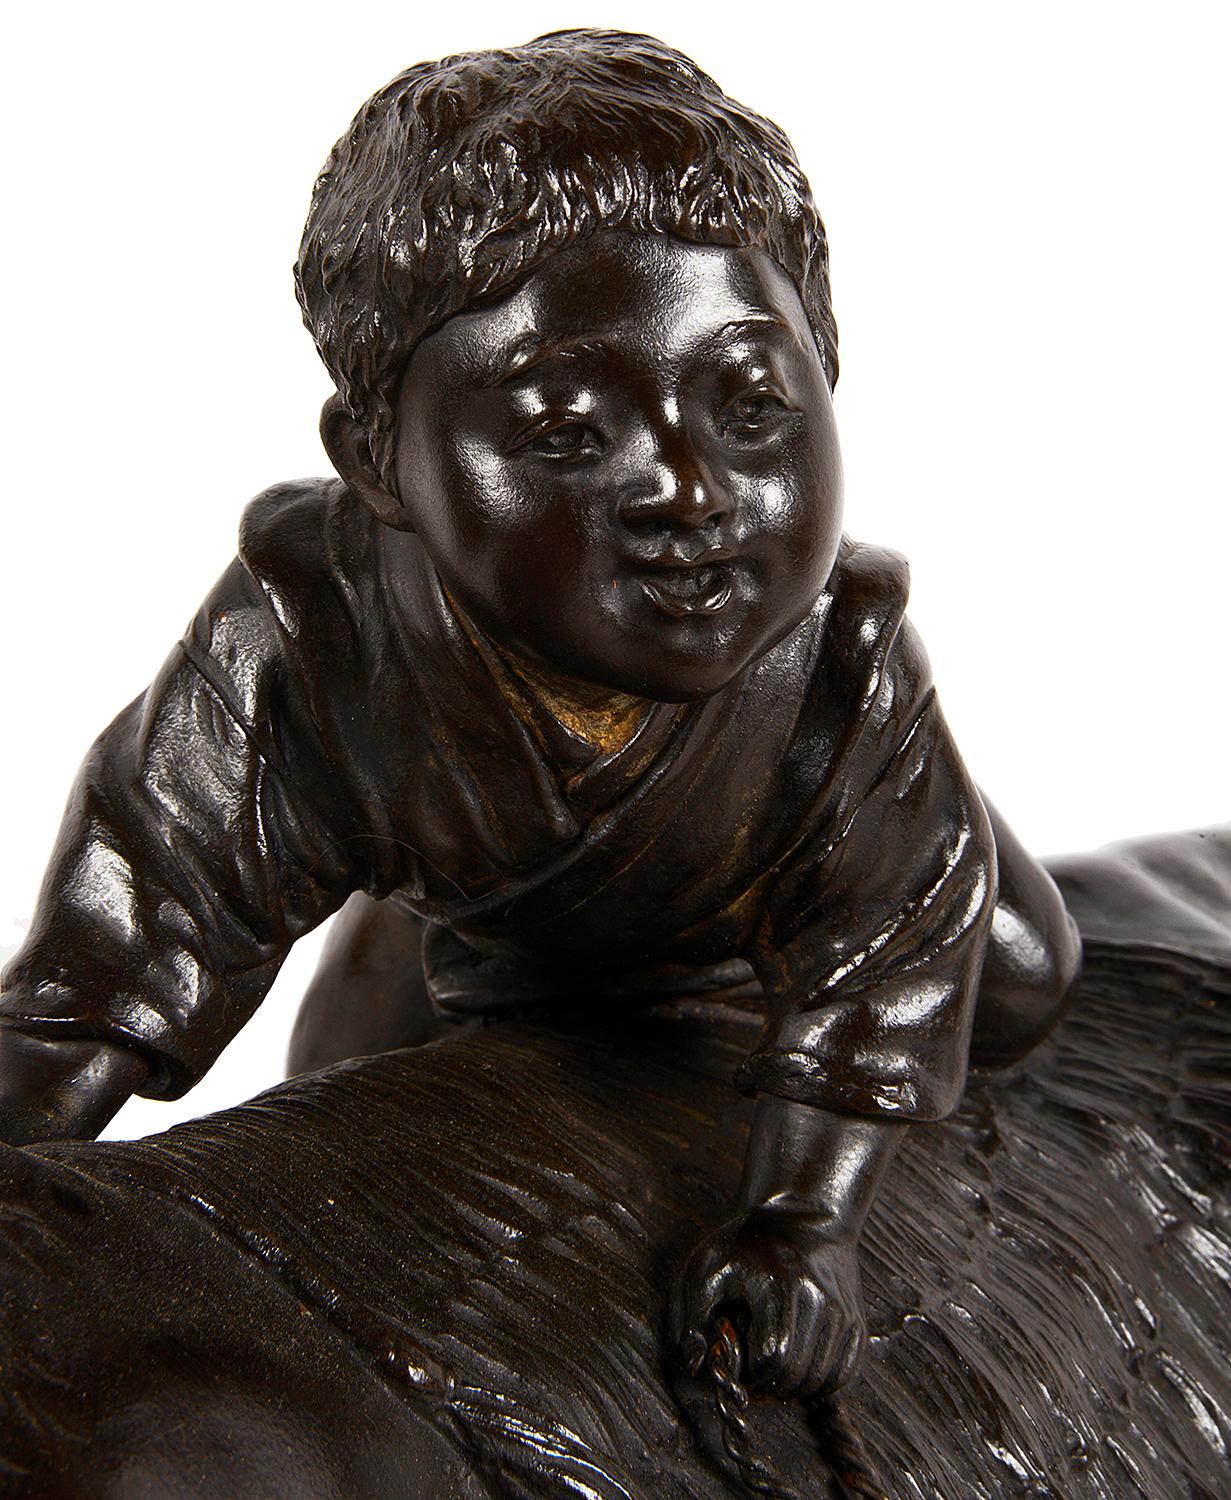 Japanese Meiji Period Bronze Ox with Boy on Its Back For Sale 1